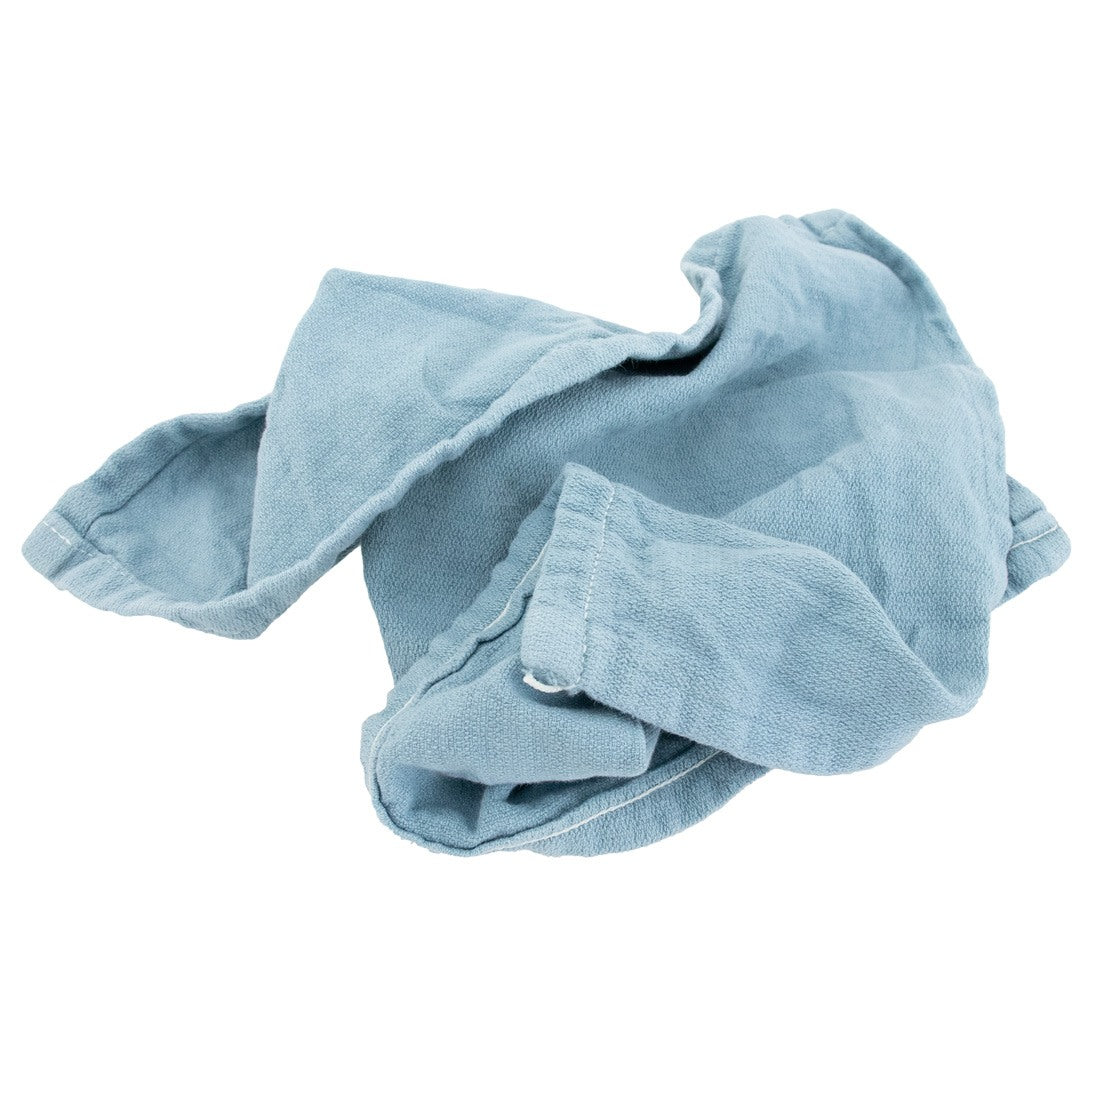 Recycled Surgical Towels Blue Crumpled View